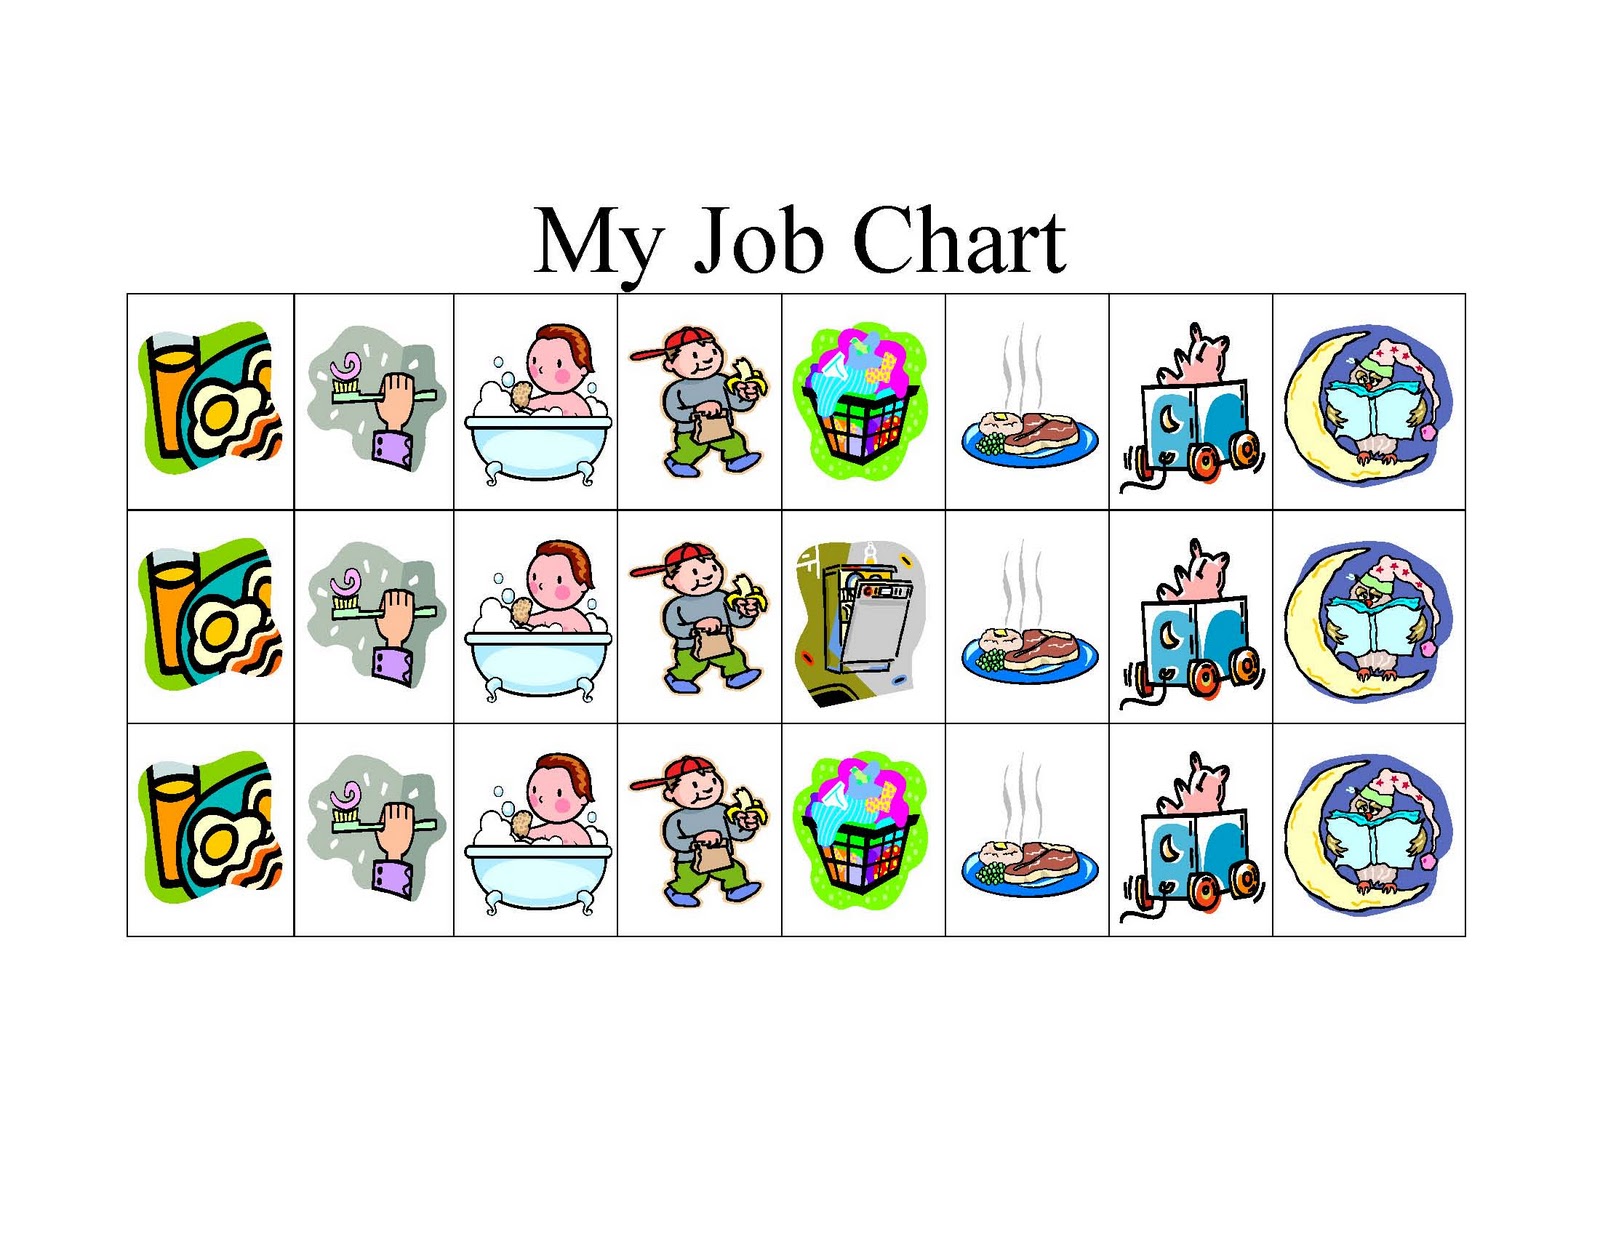 toy clipart chart